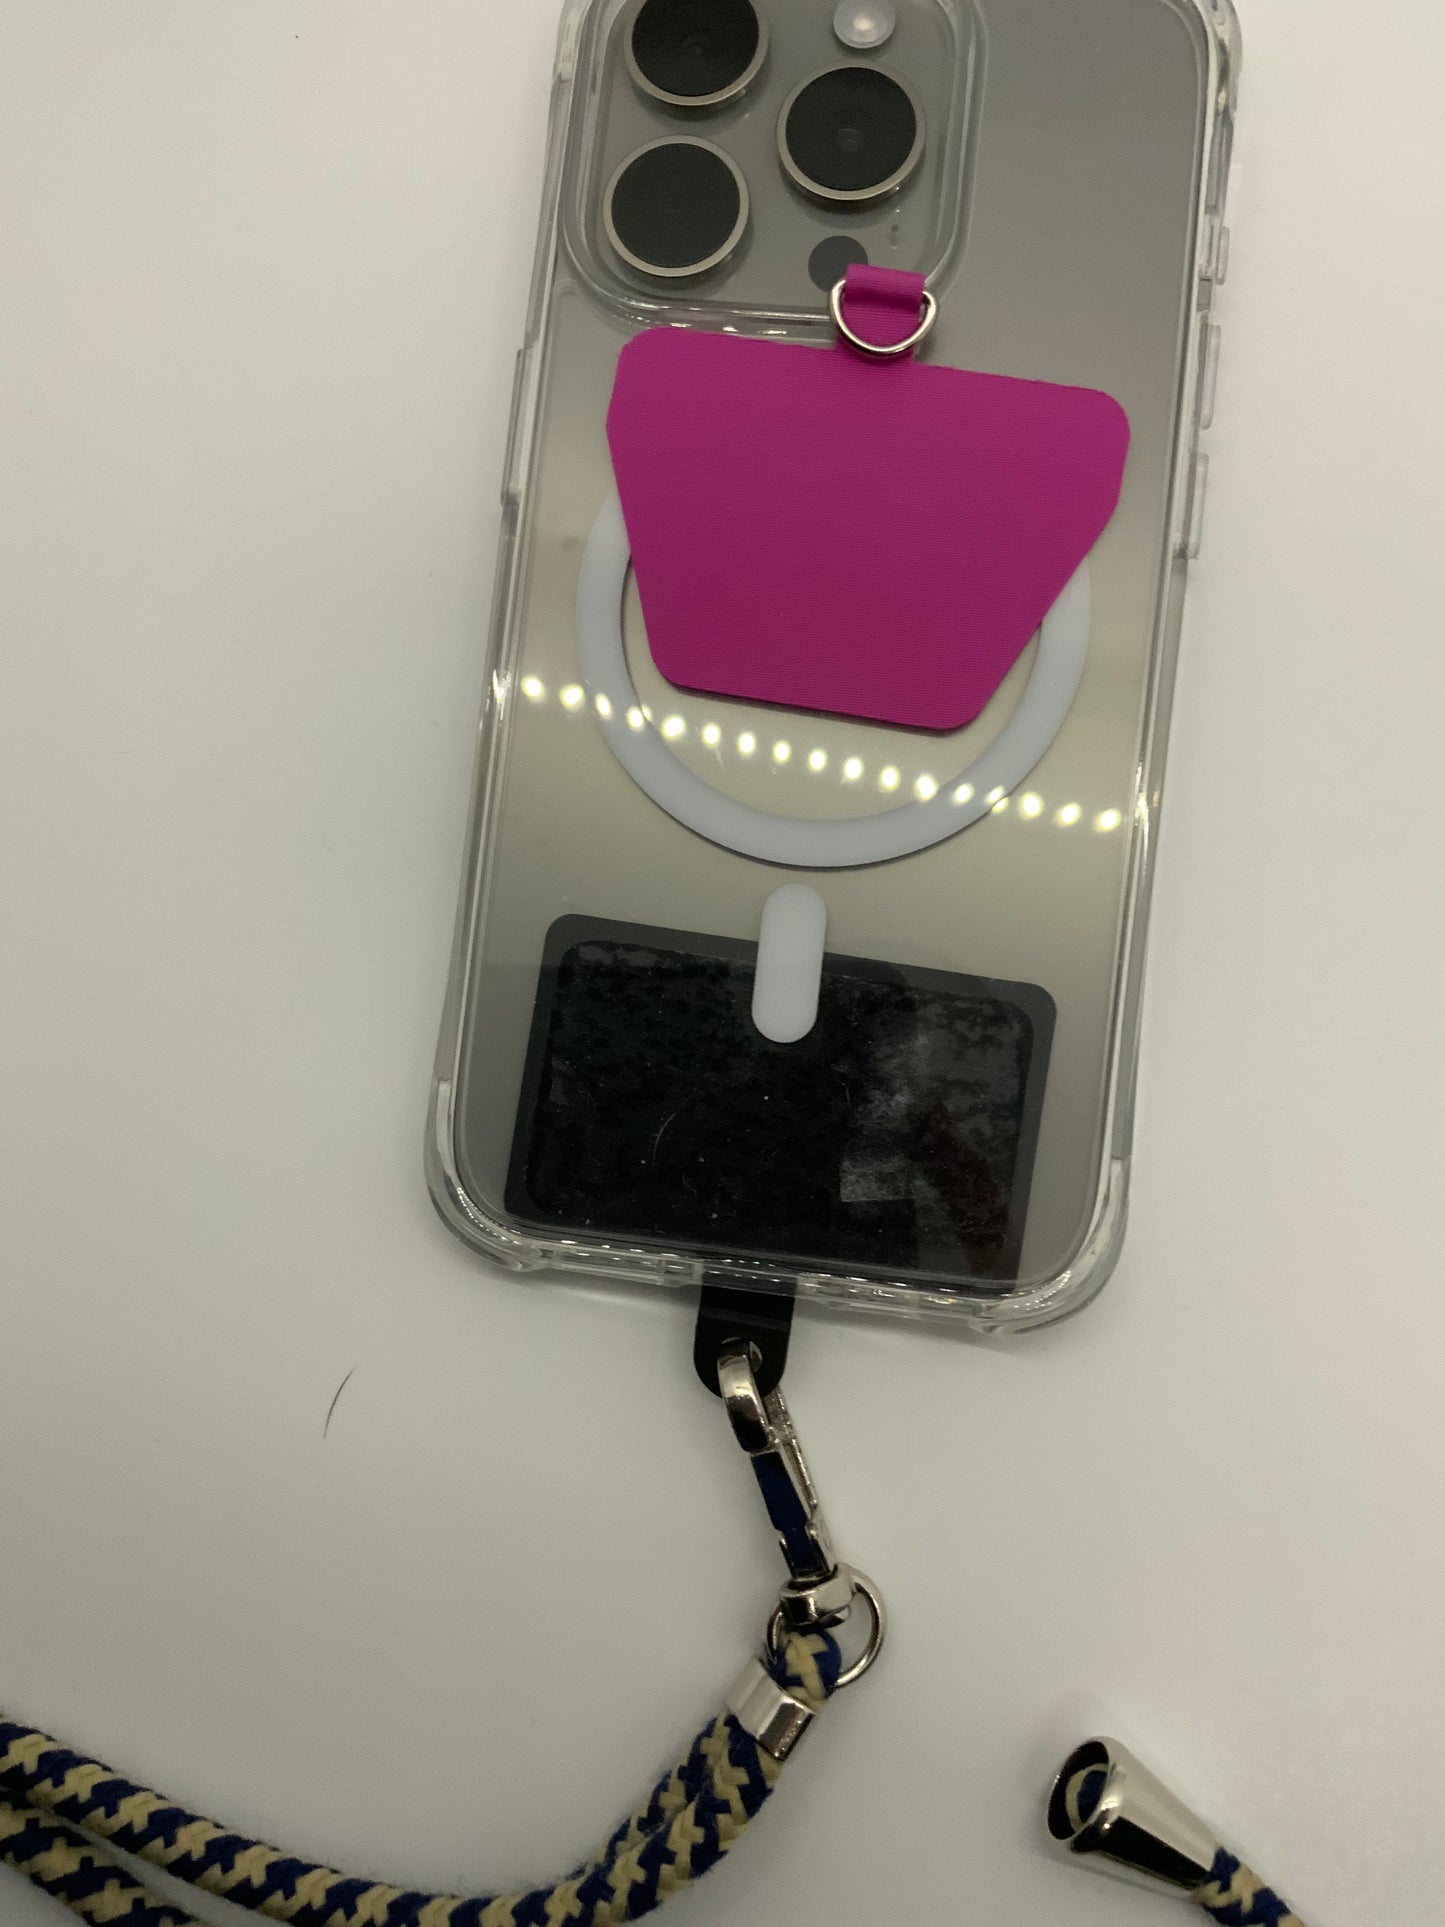 The picture shows a phone with a clear case on a white background. The phone has three camera lenses and a flash in a square arrangement at the top left corner. There is a pink sticky note attached to the back of the phone case, and it has a small metal ring attached to it. Below the sticky note, there is a white circular object with LED lights. The phone case also has a slot for an ID or credit card at the bottom. Attached to the bottom of the phone case is a blue and white braided lanyard with m